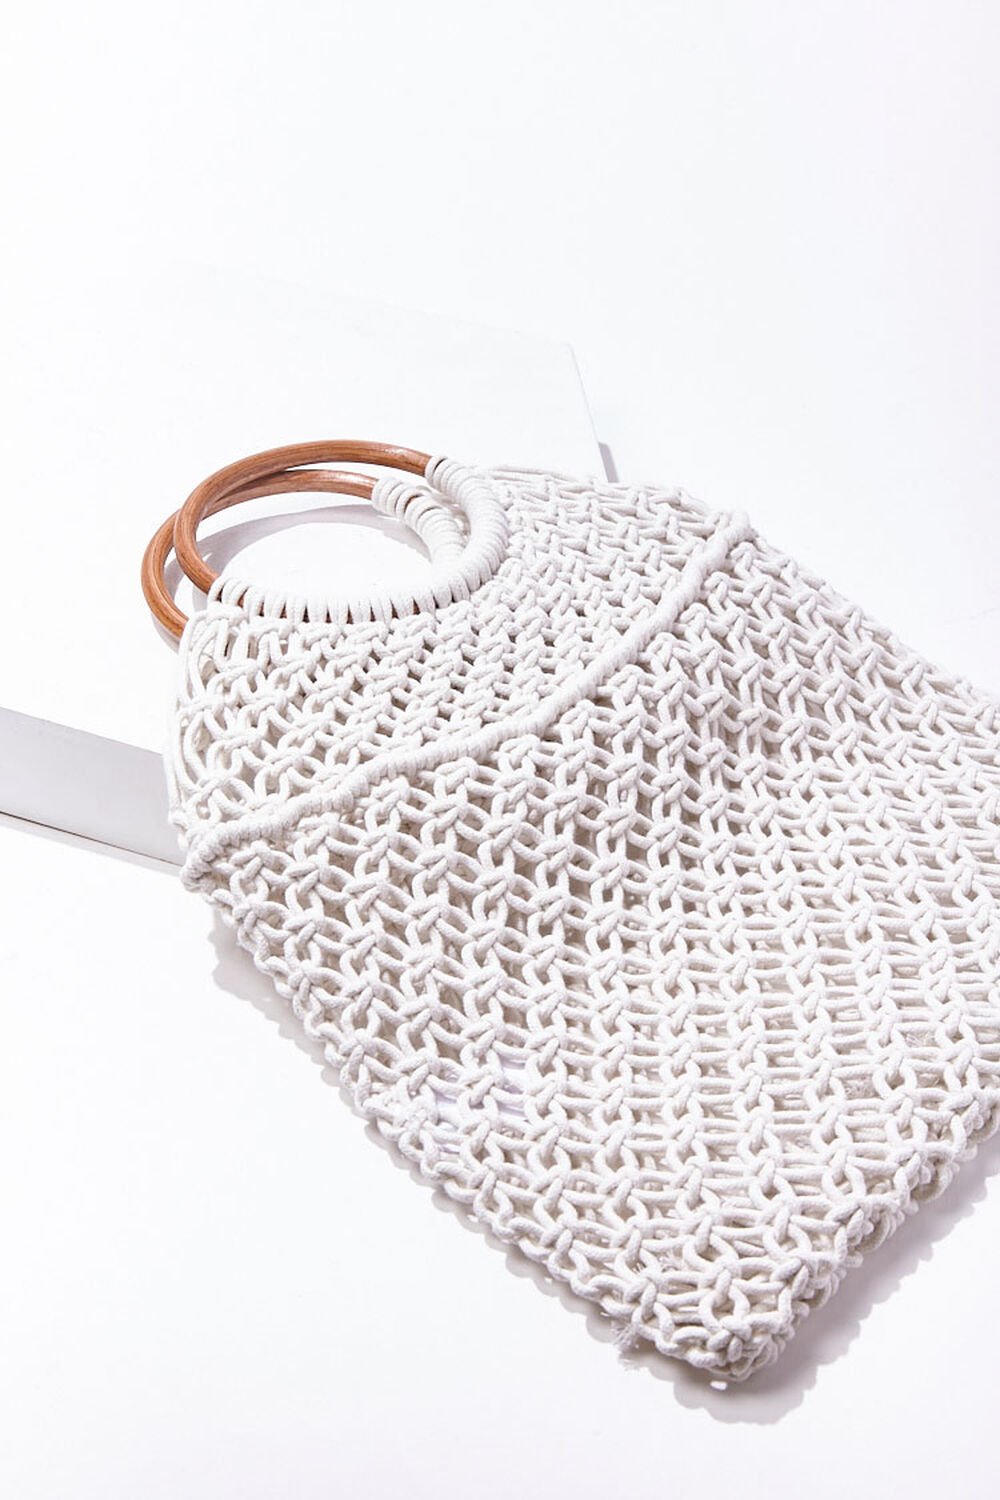 IVORY Open-Knit Tote Bag, image 1